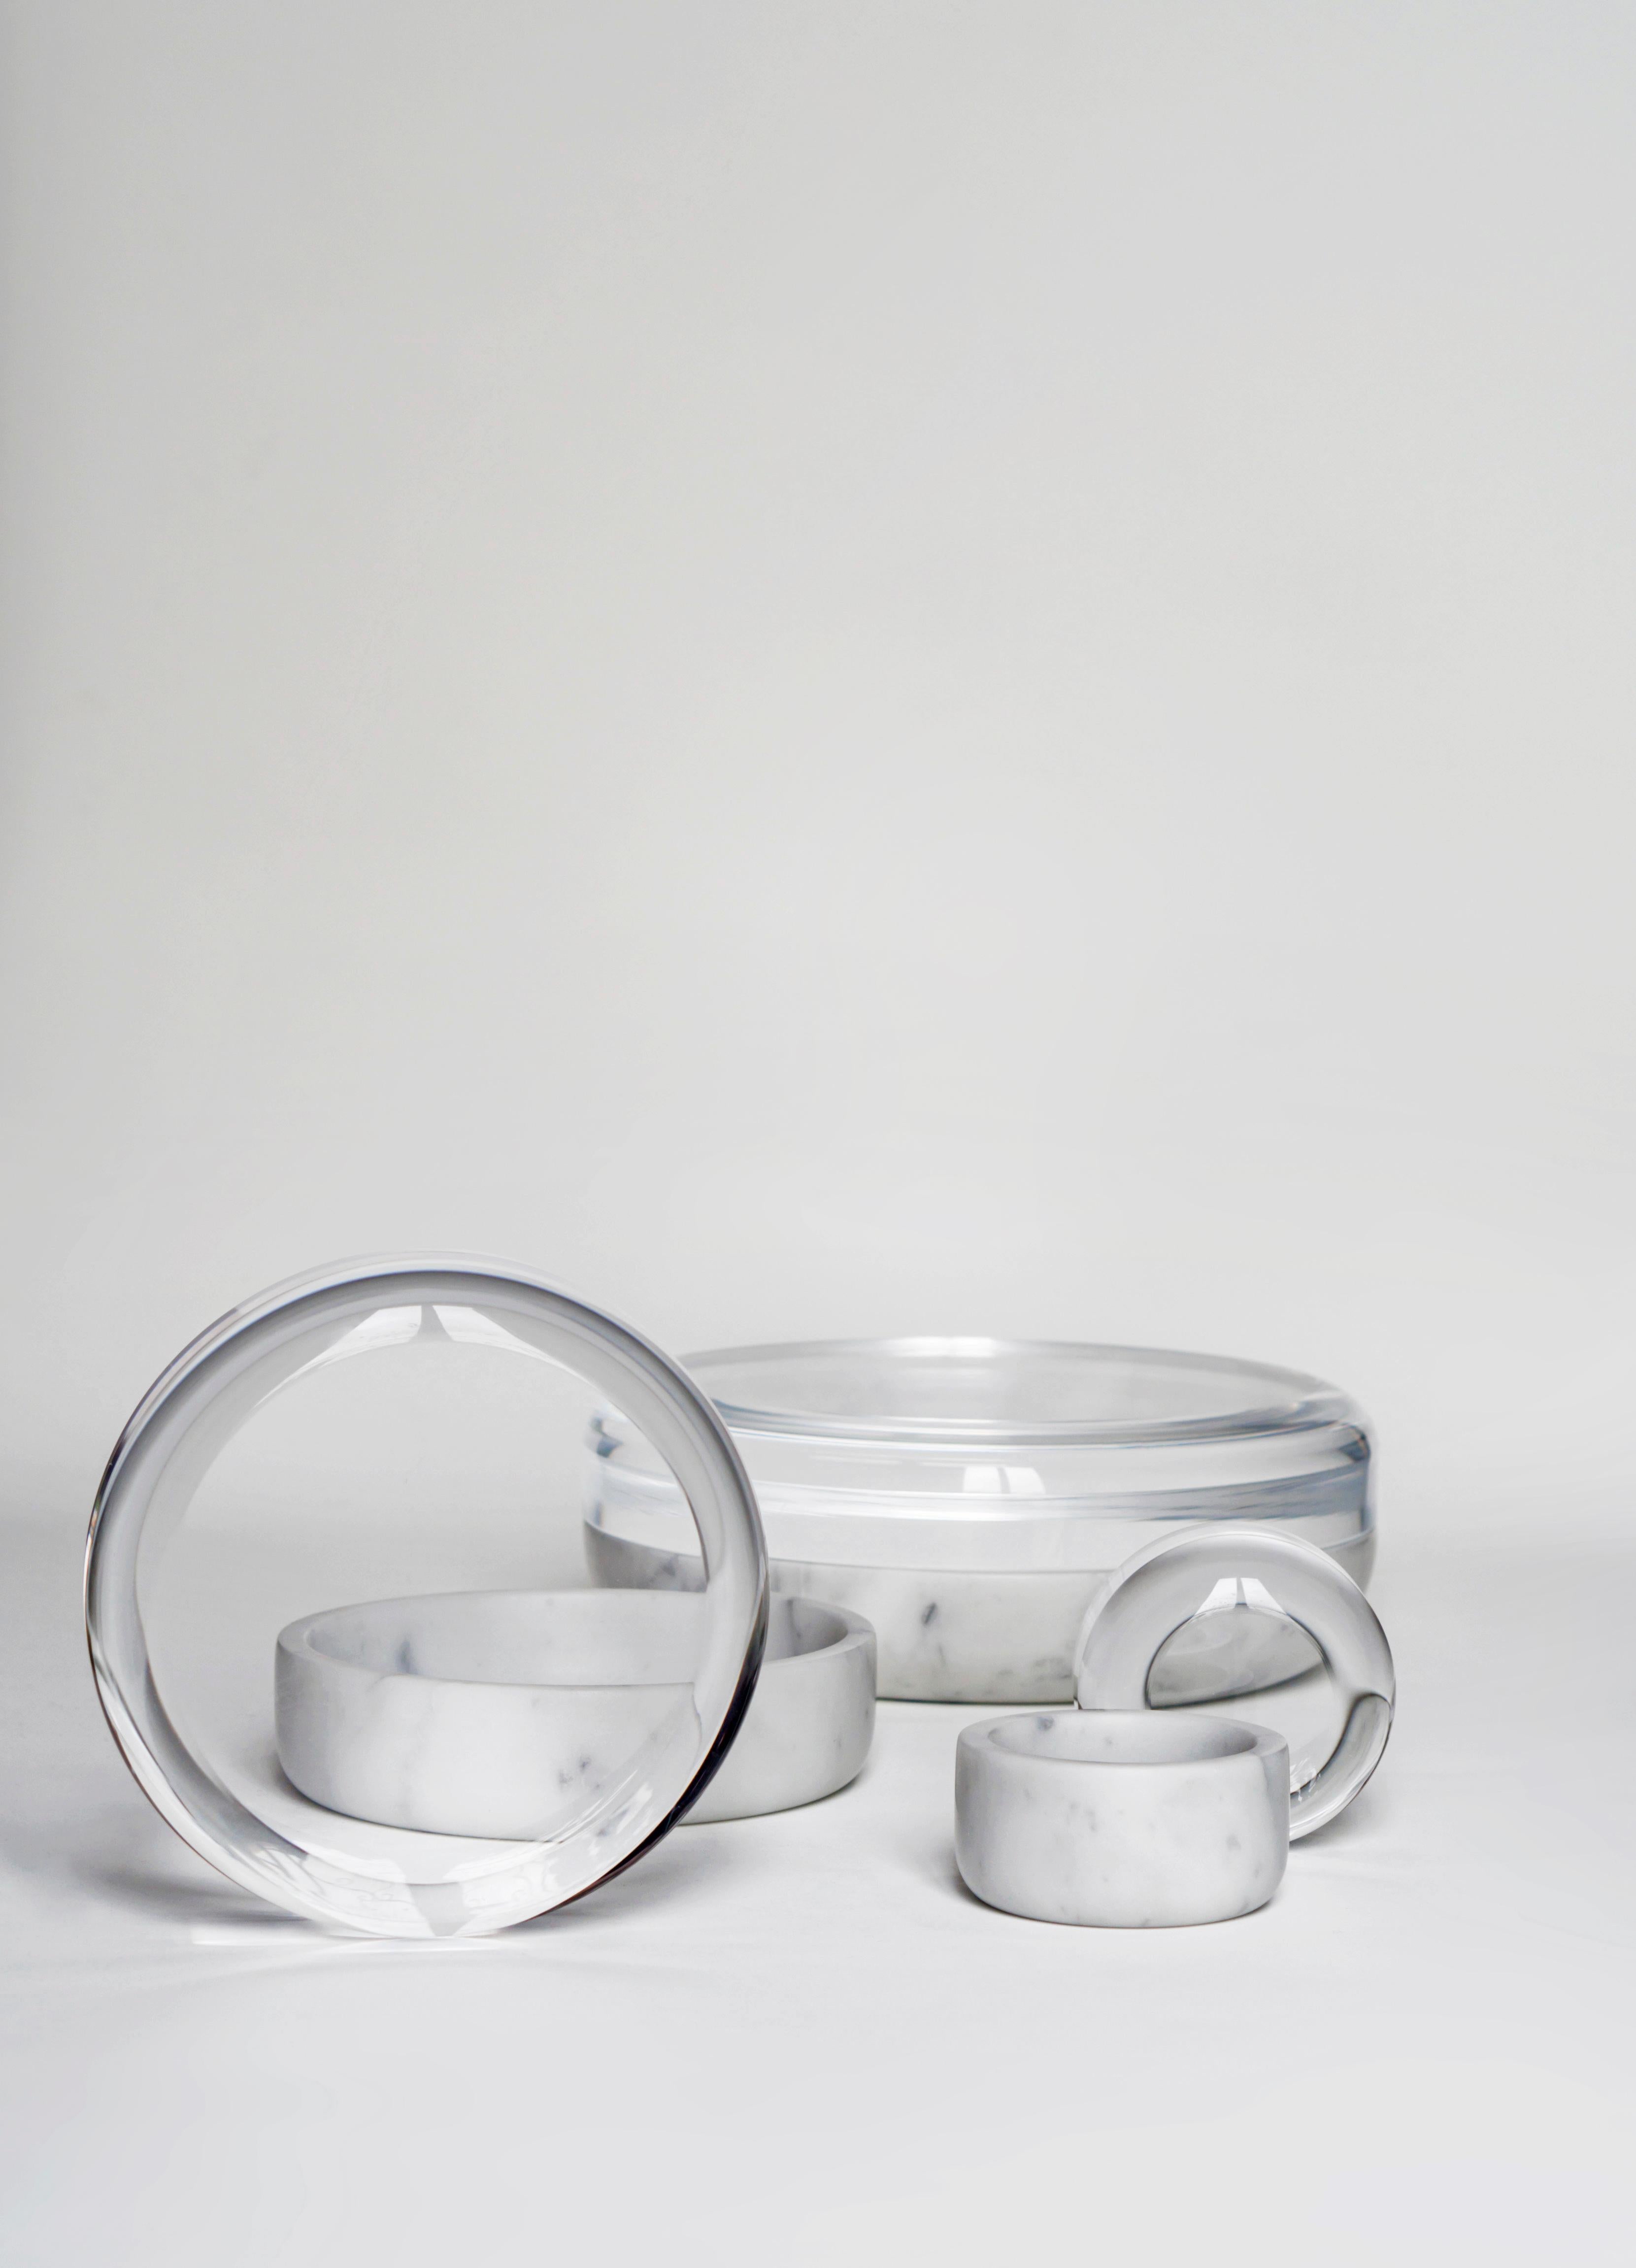 A collection of jewelry holders in white Carrara marble and transparent plexiglas. The content is shown as submerged under the deforming and amplifying ice, as hibernated, timeless. They are precious containers, the eye goes beyond the material and